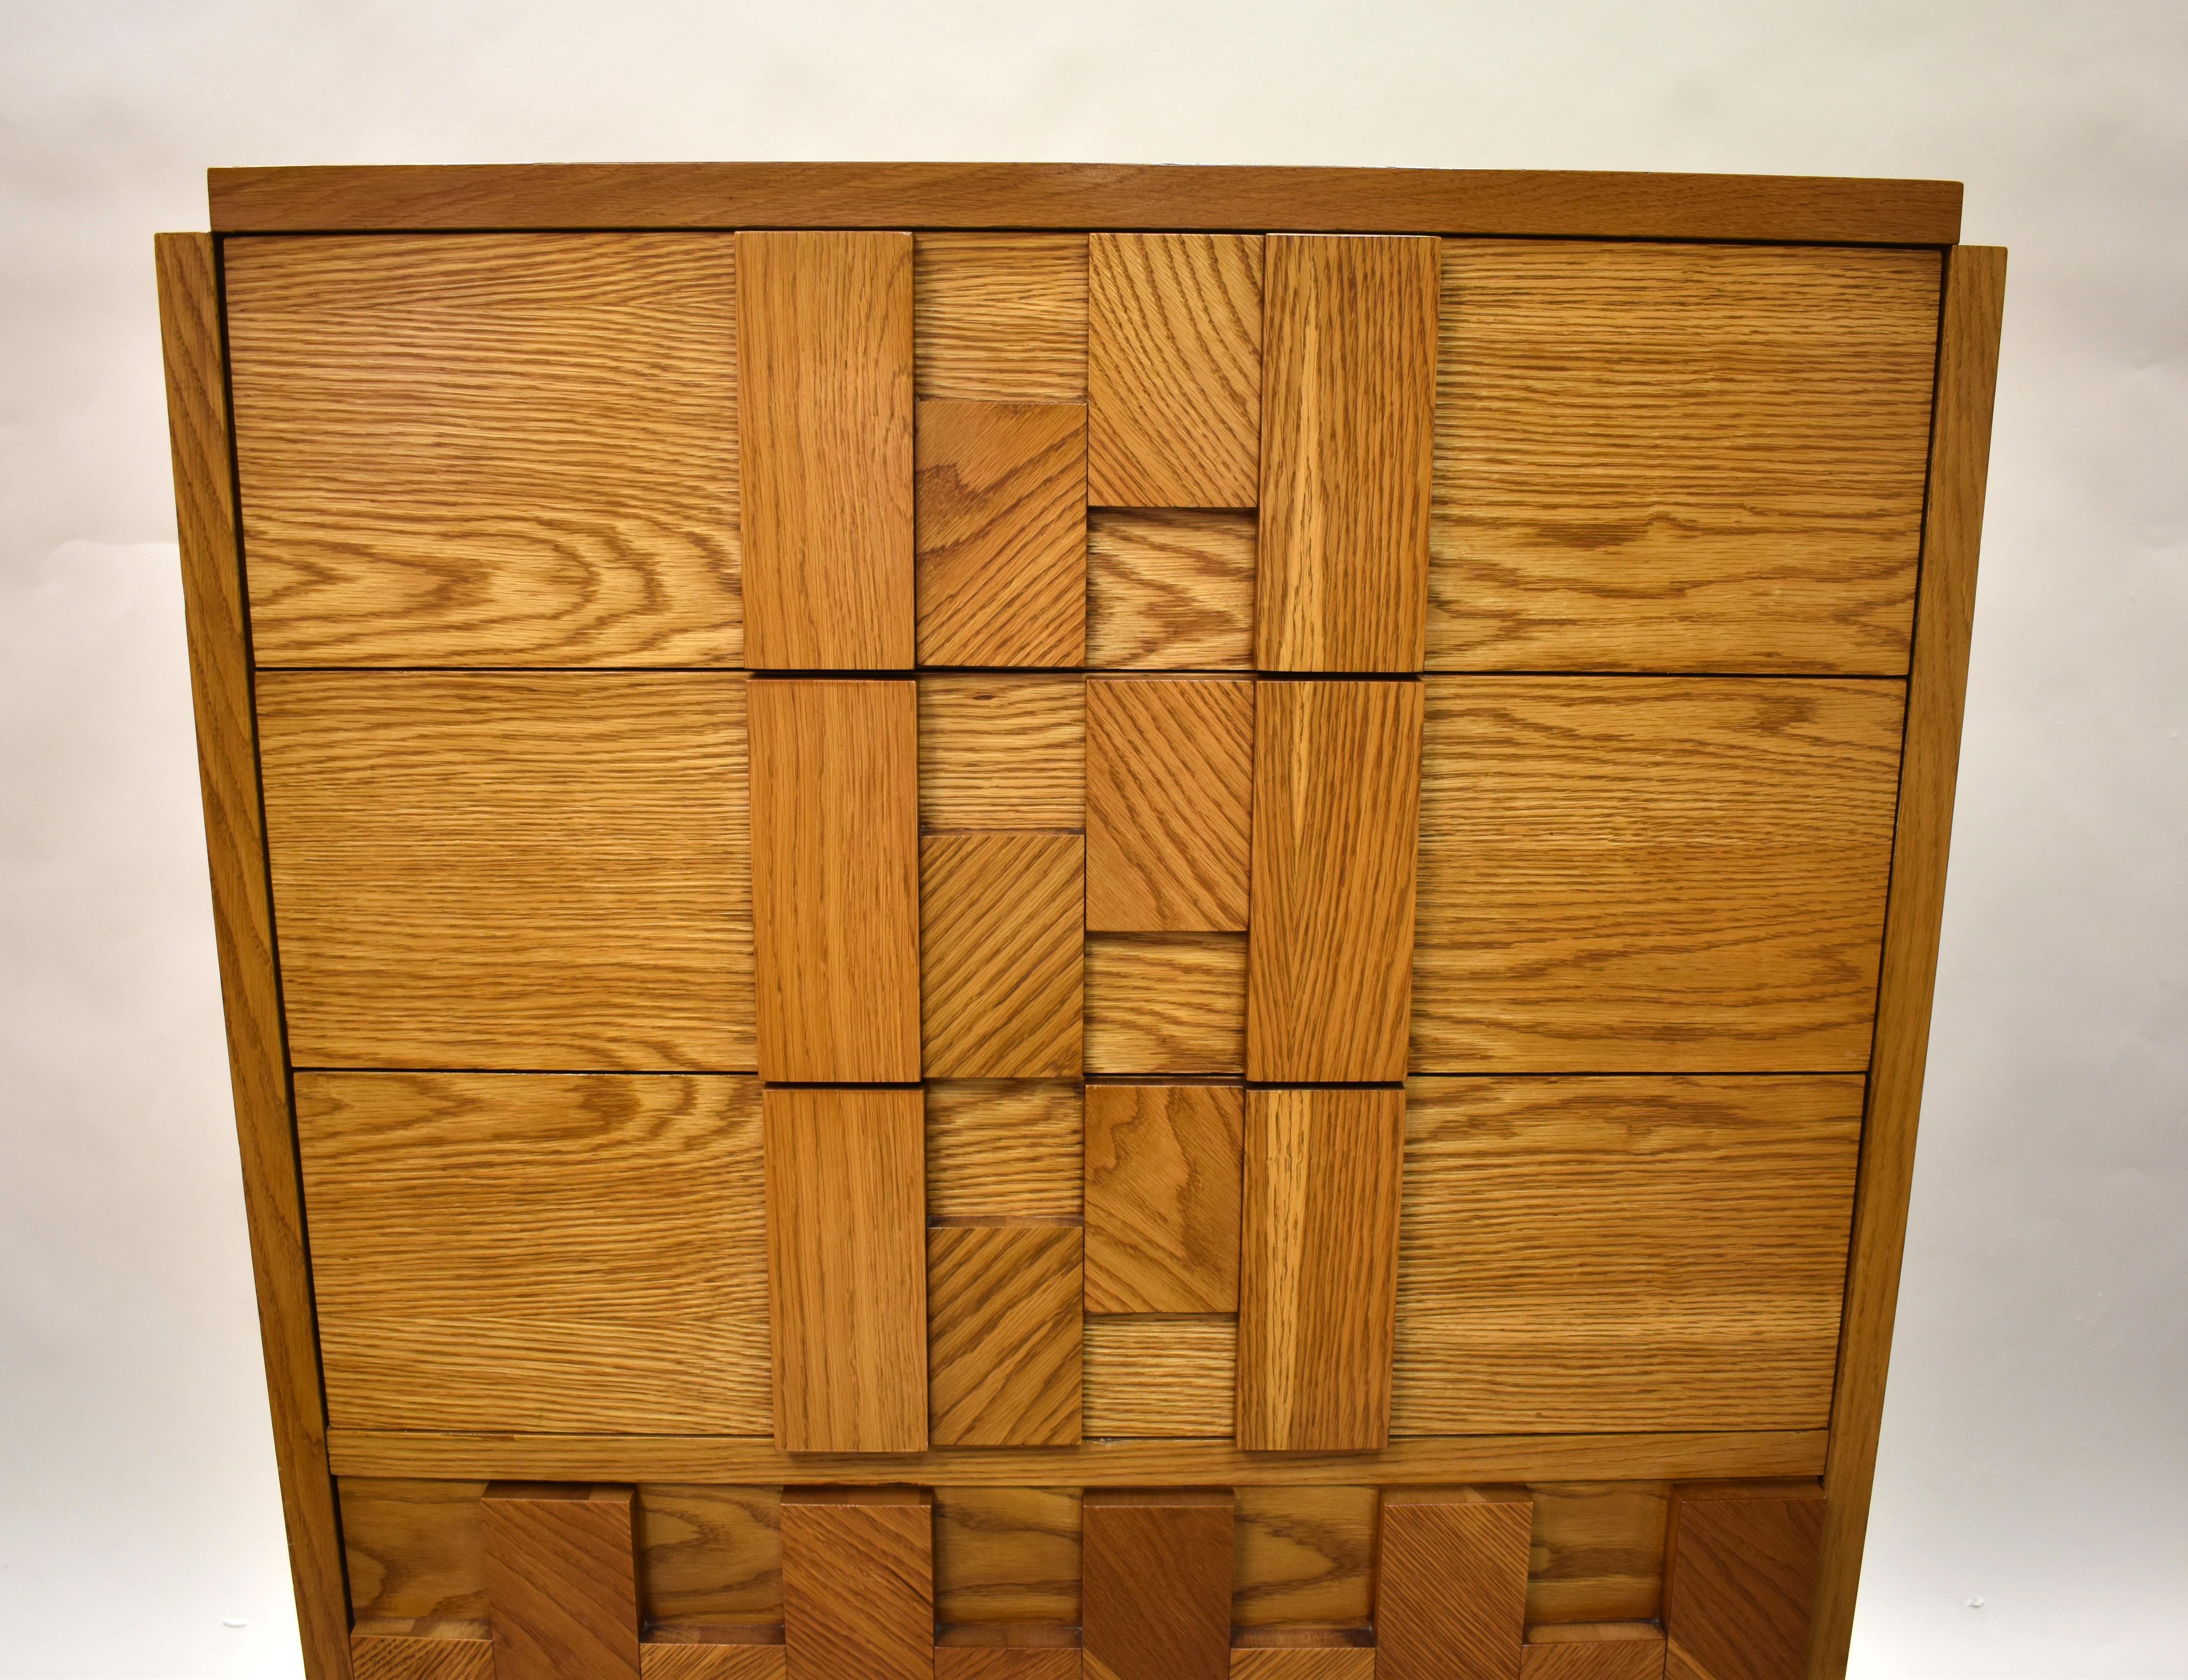 This tall chest is from the Mosaic line from Lane Furniture, inspired by the Brutalist style of Paul Evans. The dresser is crafted from oak and is in beautiful condition.